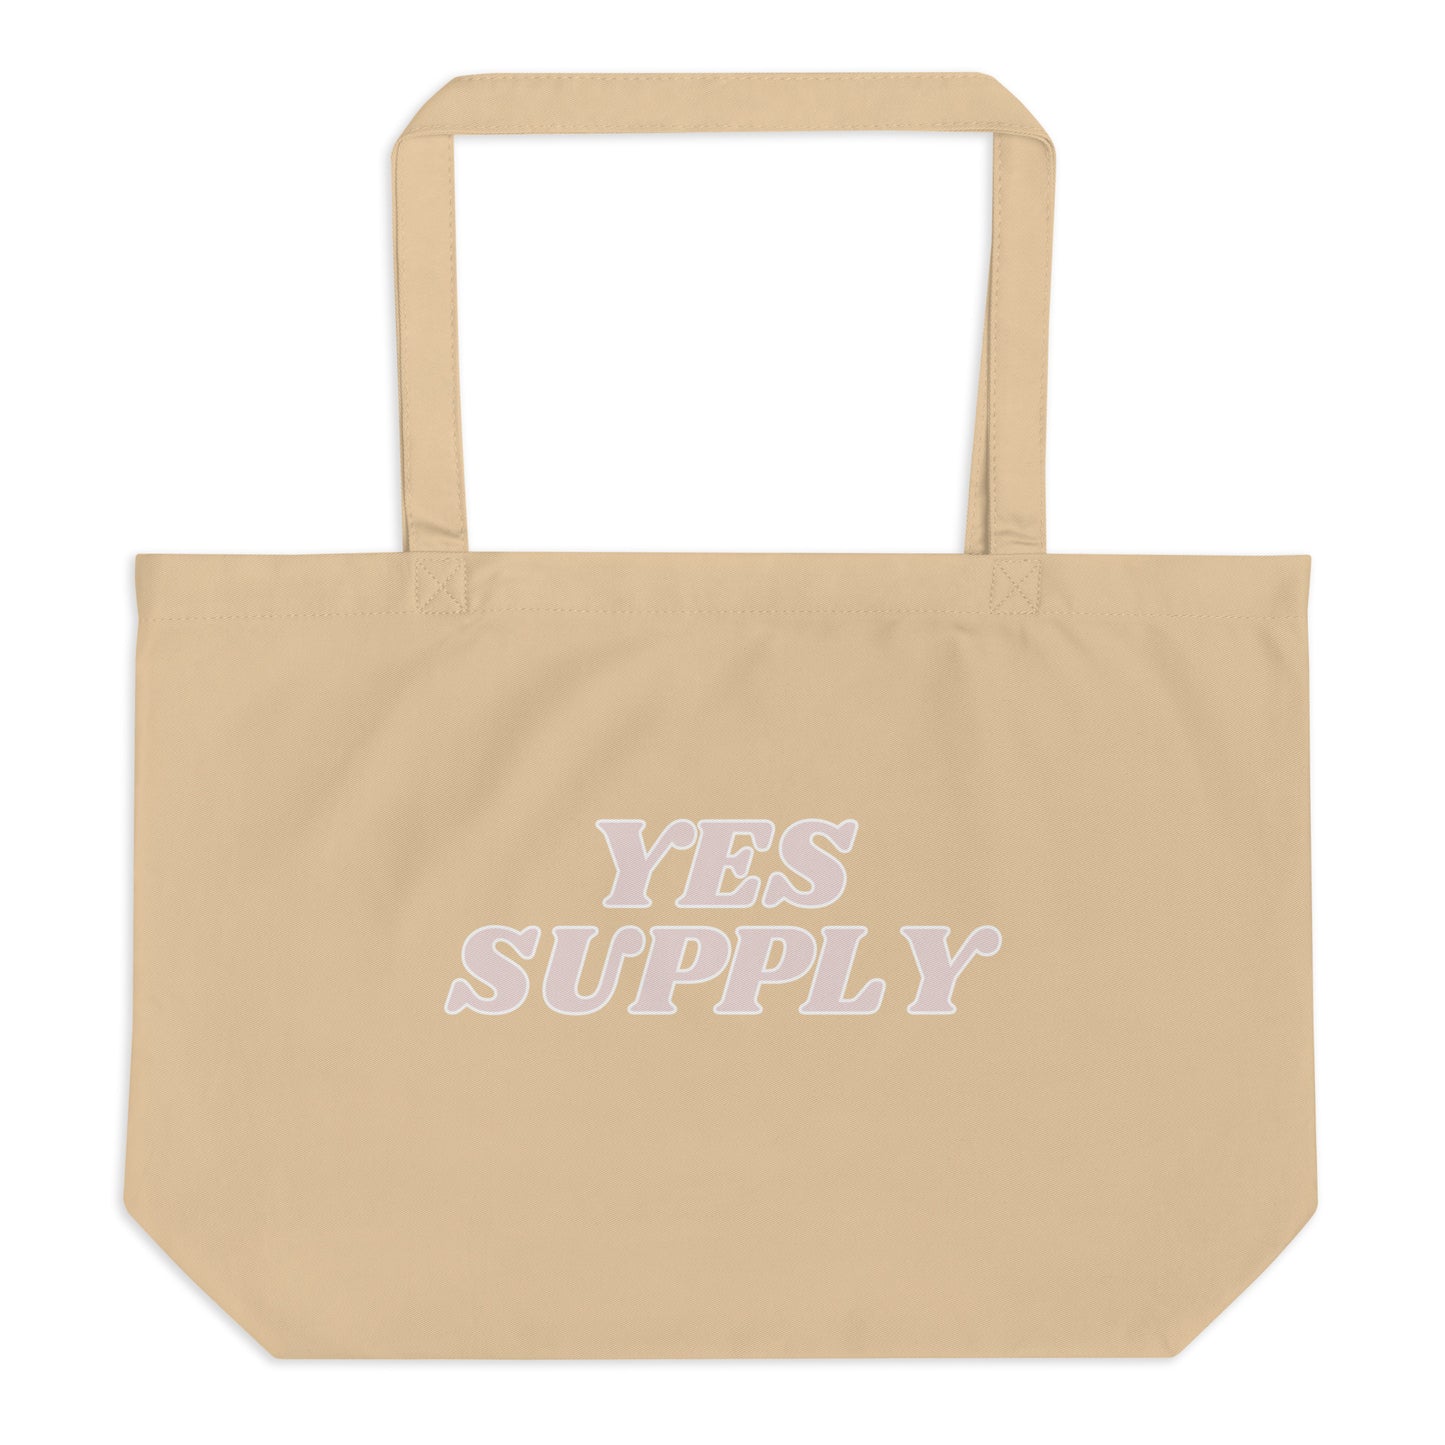 Yes Supply Tote Bag